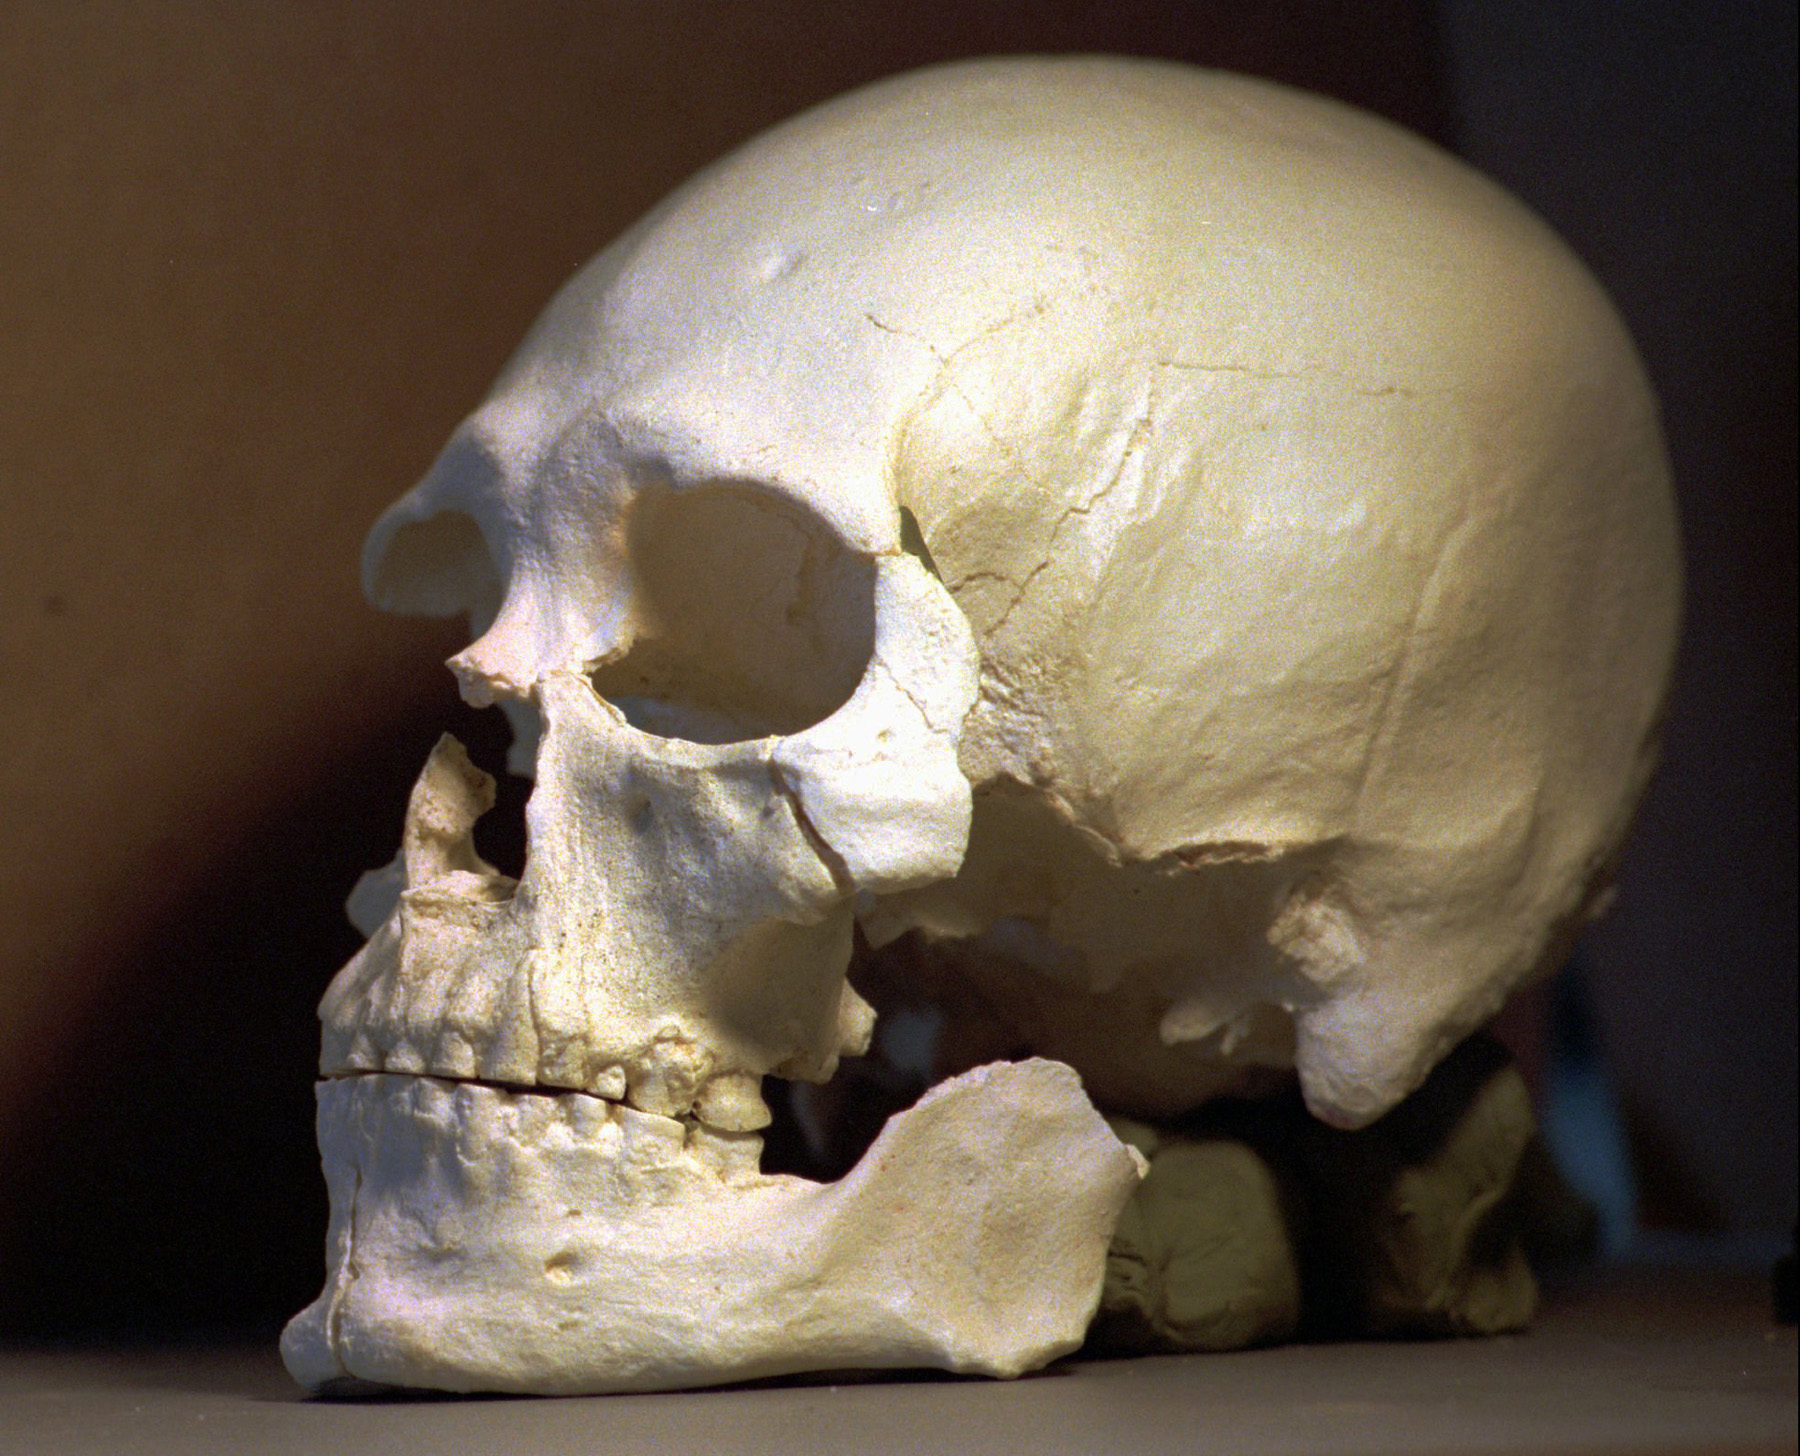 A plastic casting of the skull from the bones known as Kennewick Man, is seen in Richland, Washington, July 24, 1997. (Elaine Thompson—AP)